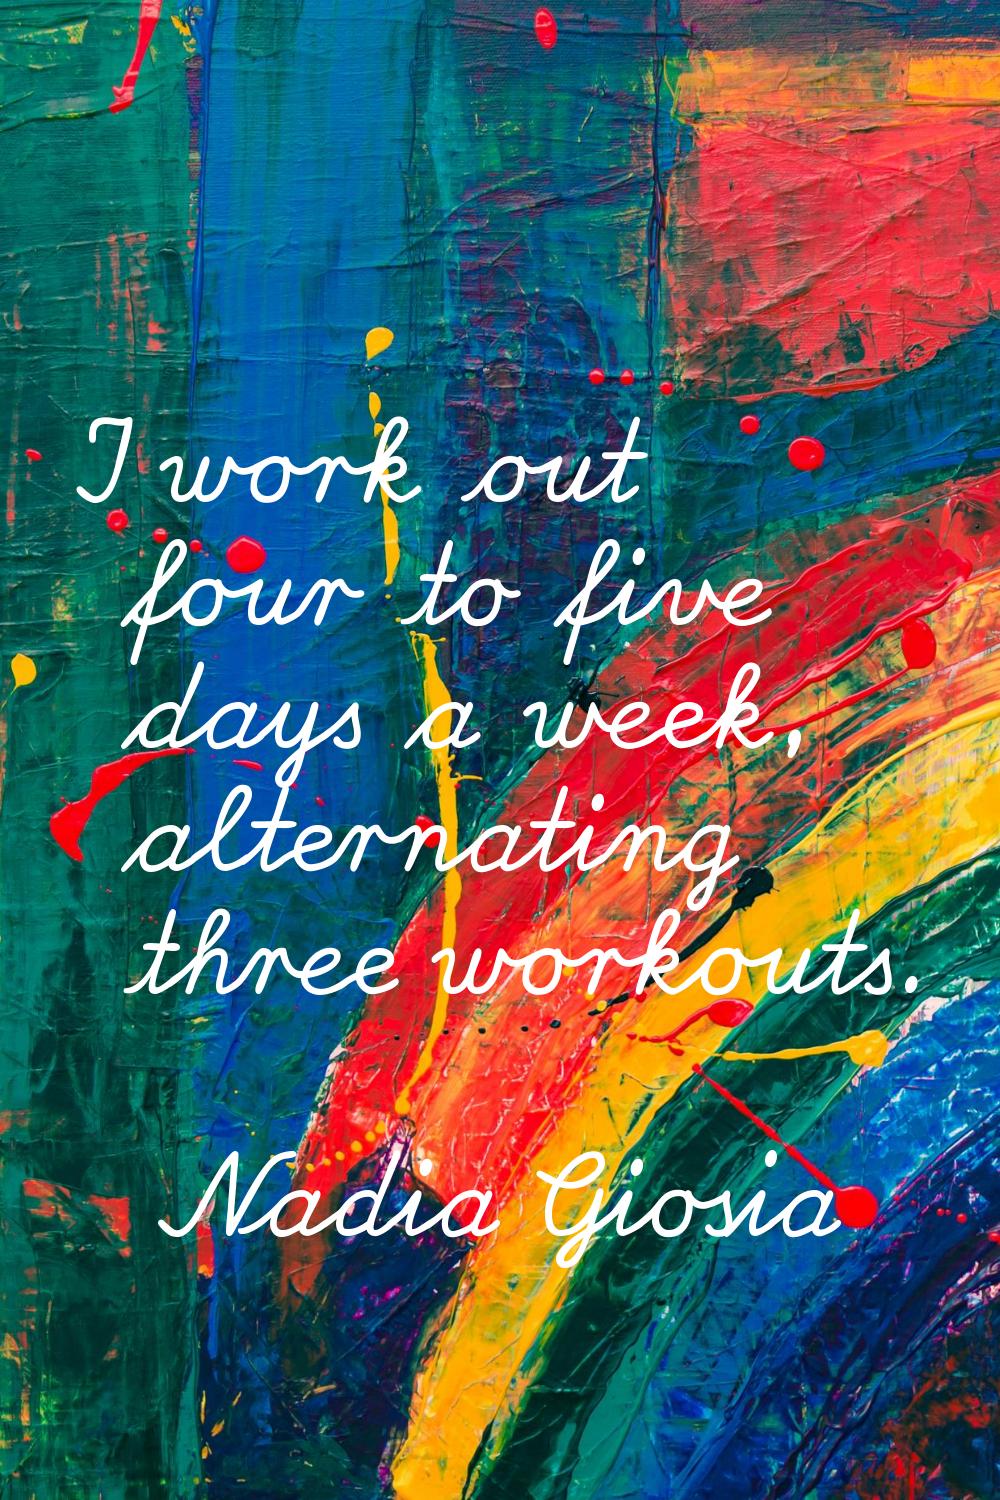 I work out four to five days a week, alternating three workouts.